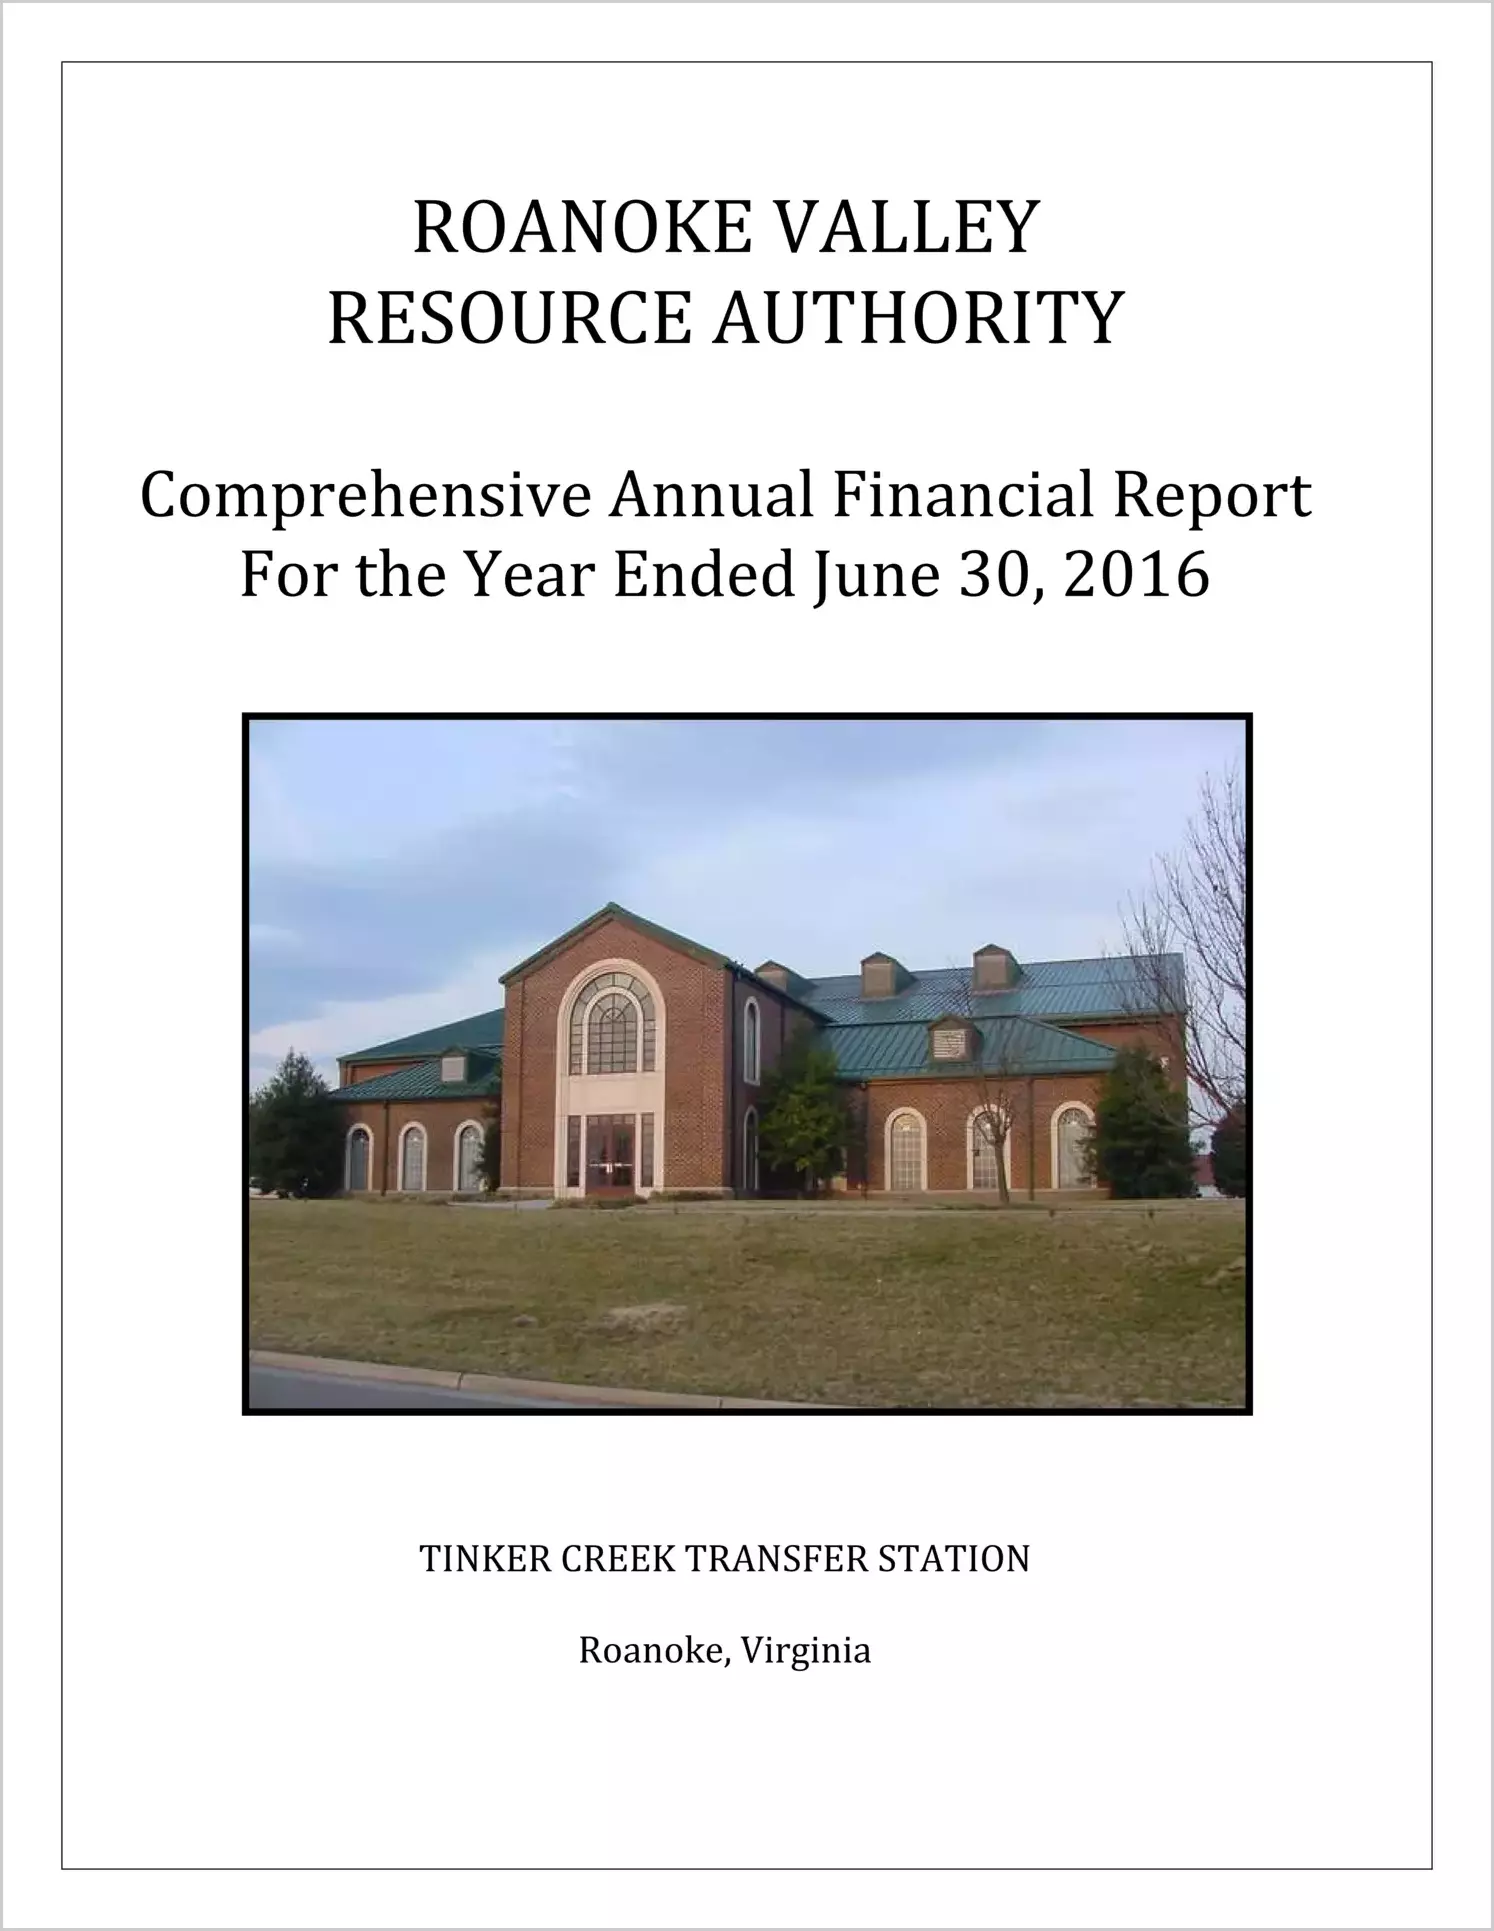 2016 ABC/Other Annual Financial Report  for Roanoke Valley Resource Authority